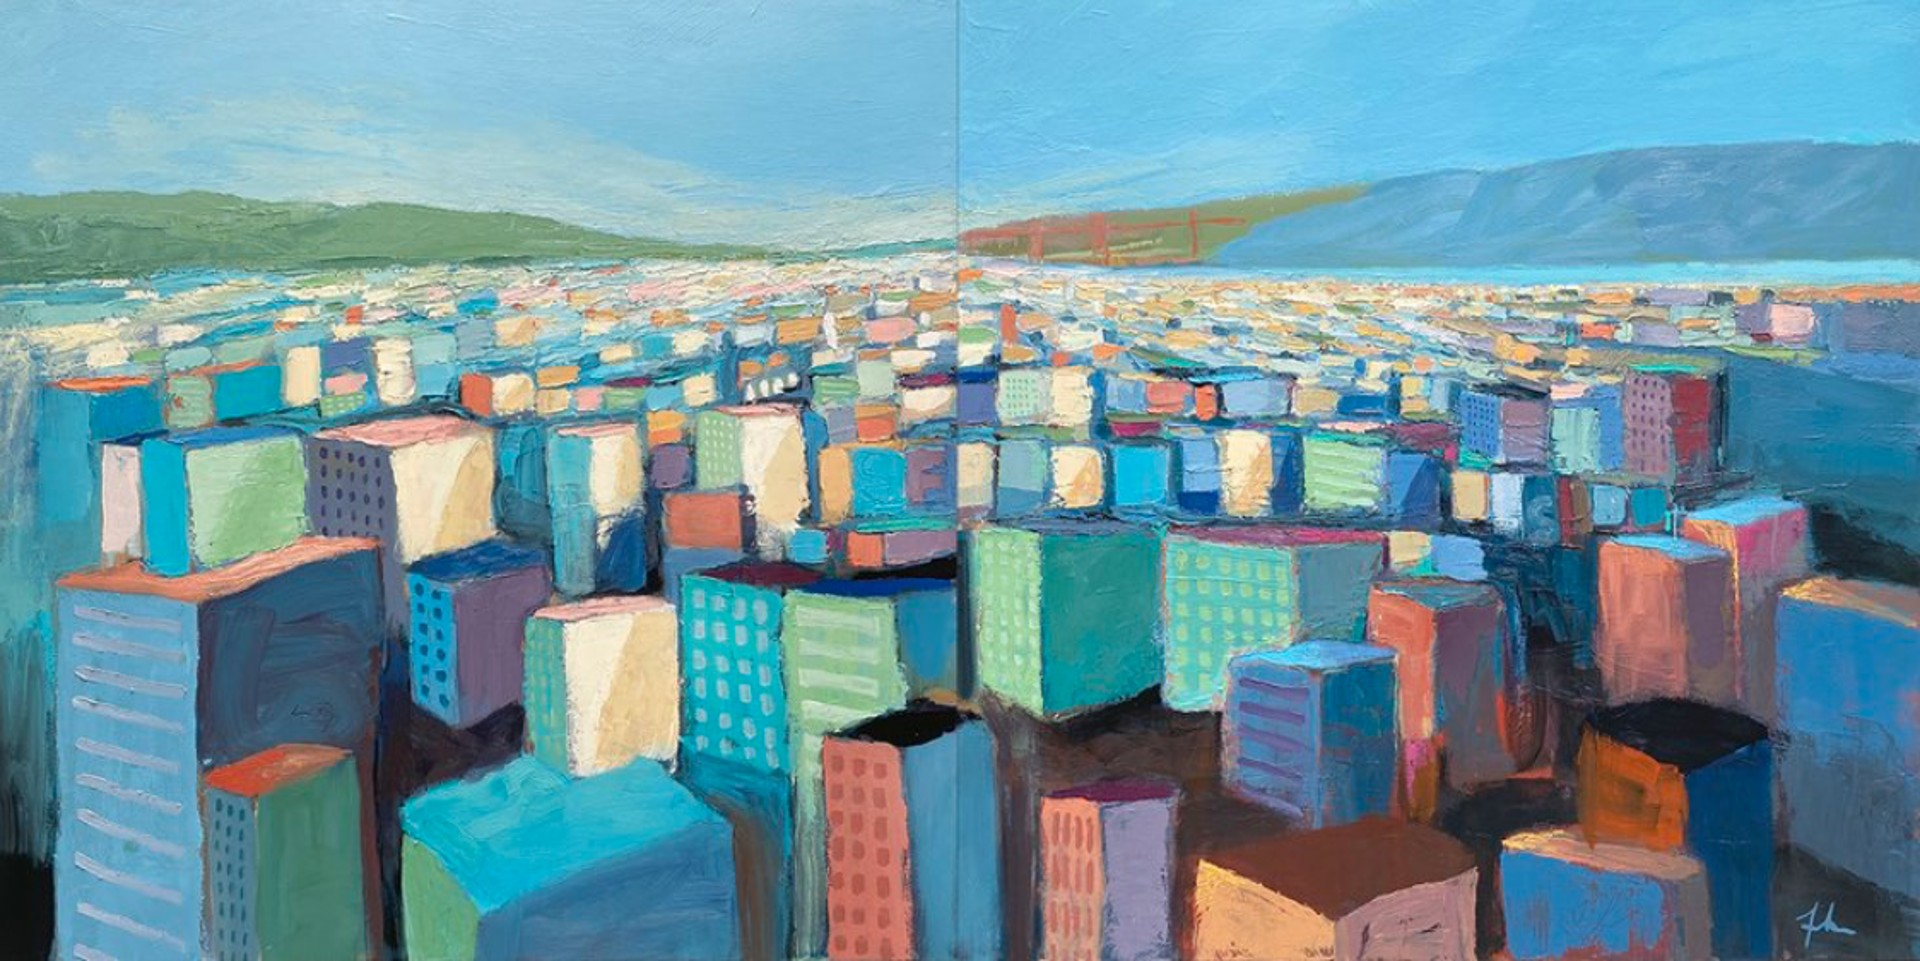 SF Glow (diptych) by Andrew Faulkner